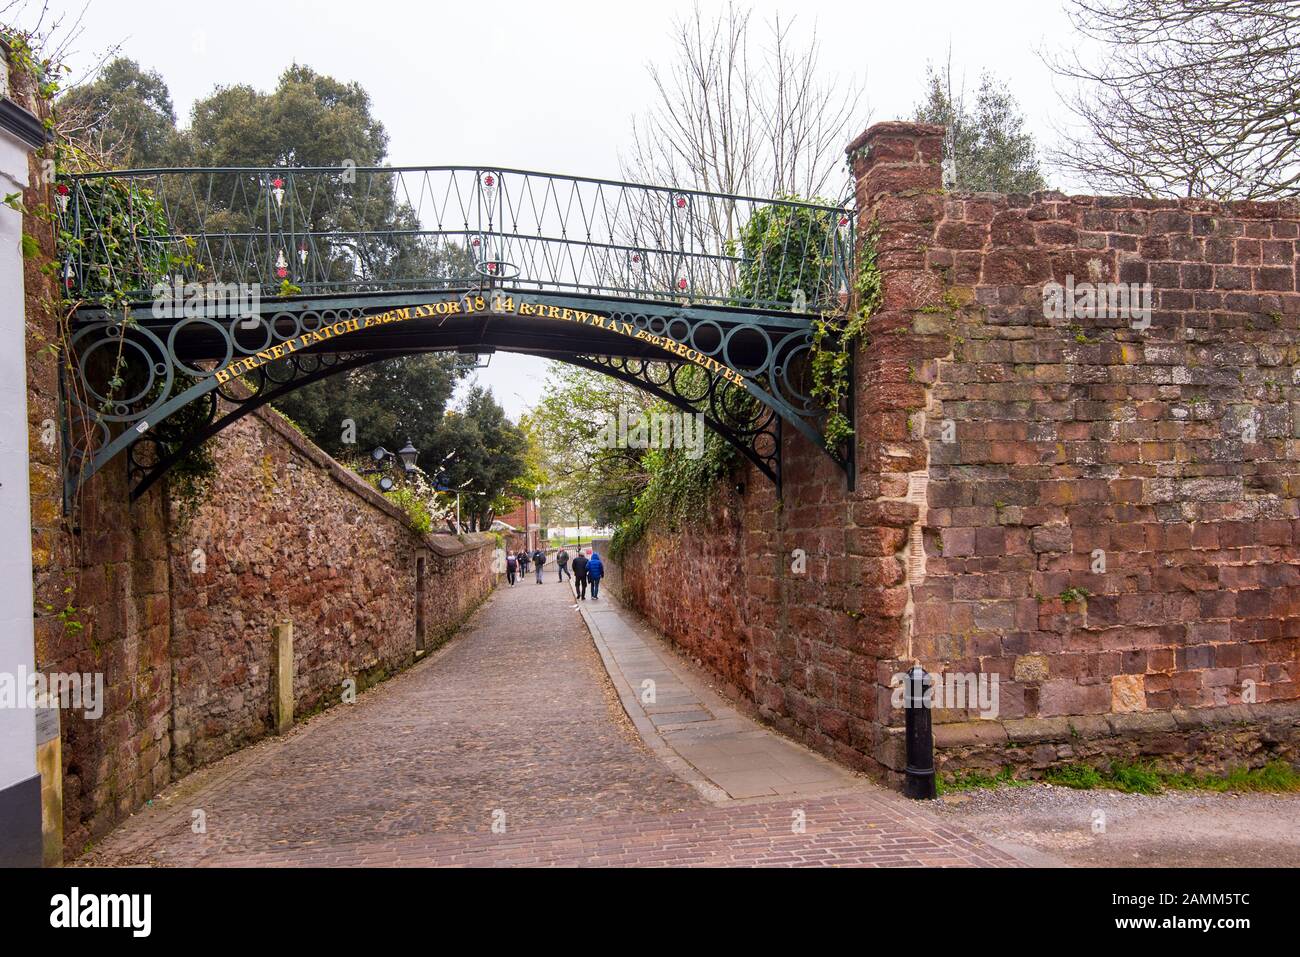 EXETER, DEVON, UK - 31MAR19: The Burnet Patch Bridge was Exeter's first wrought iron bridge, built to aid the mayor in making his annual Muraltie Walk Stock Photo